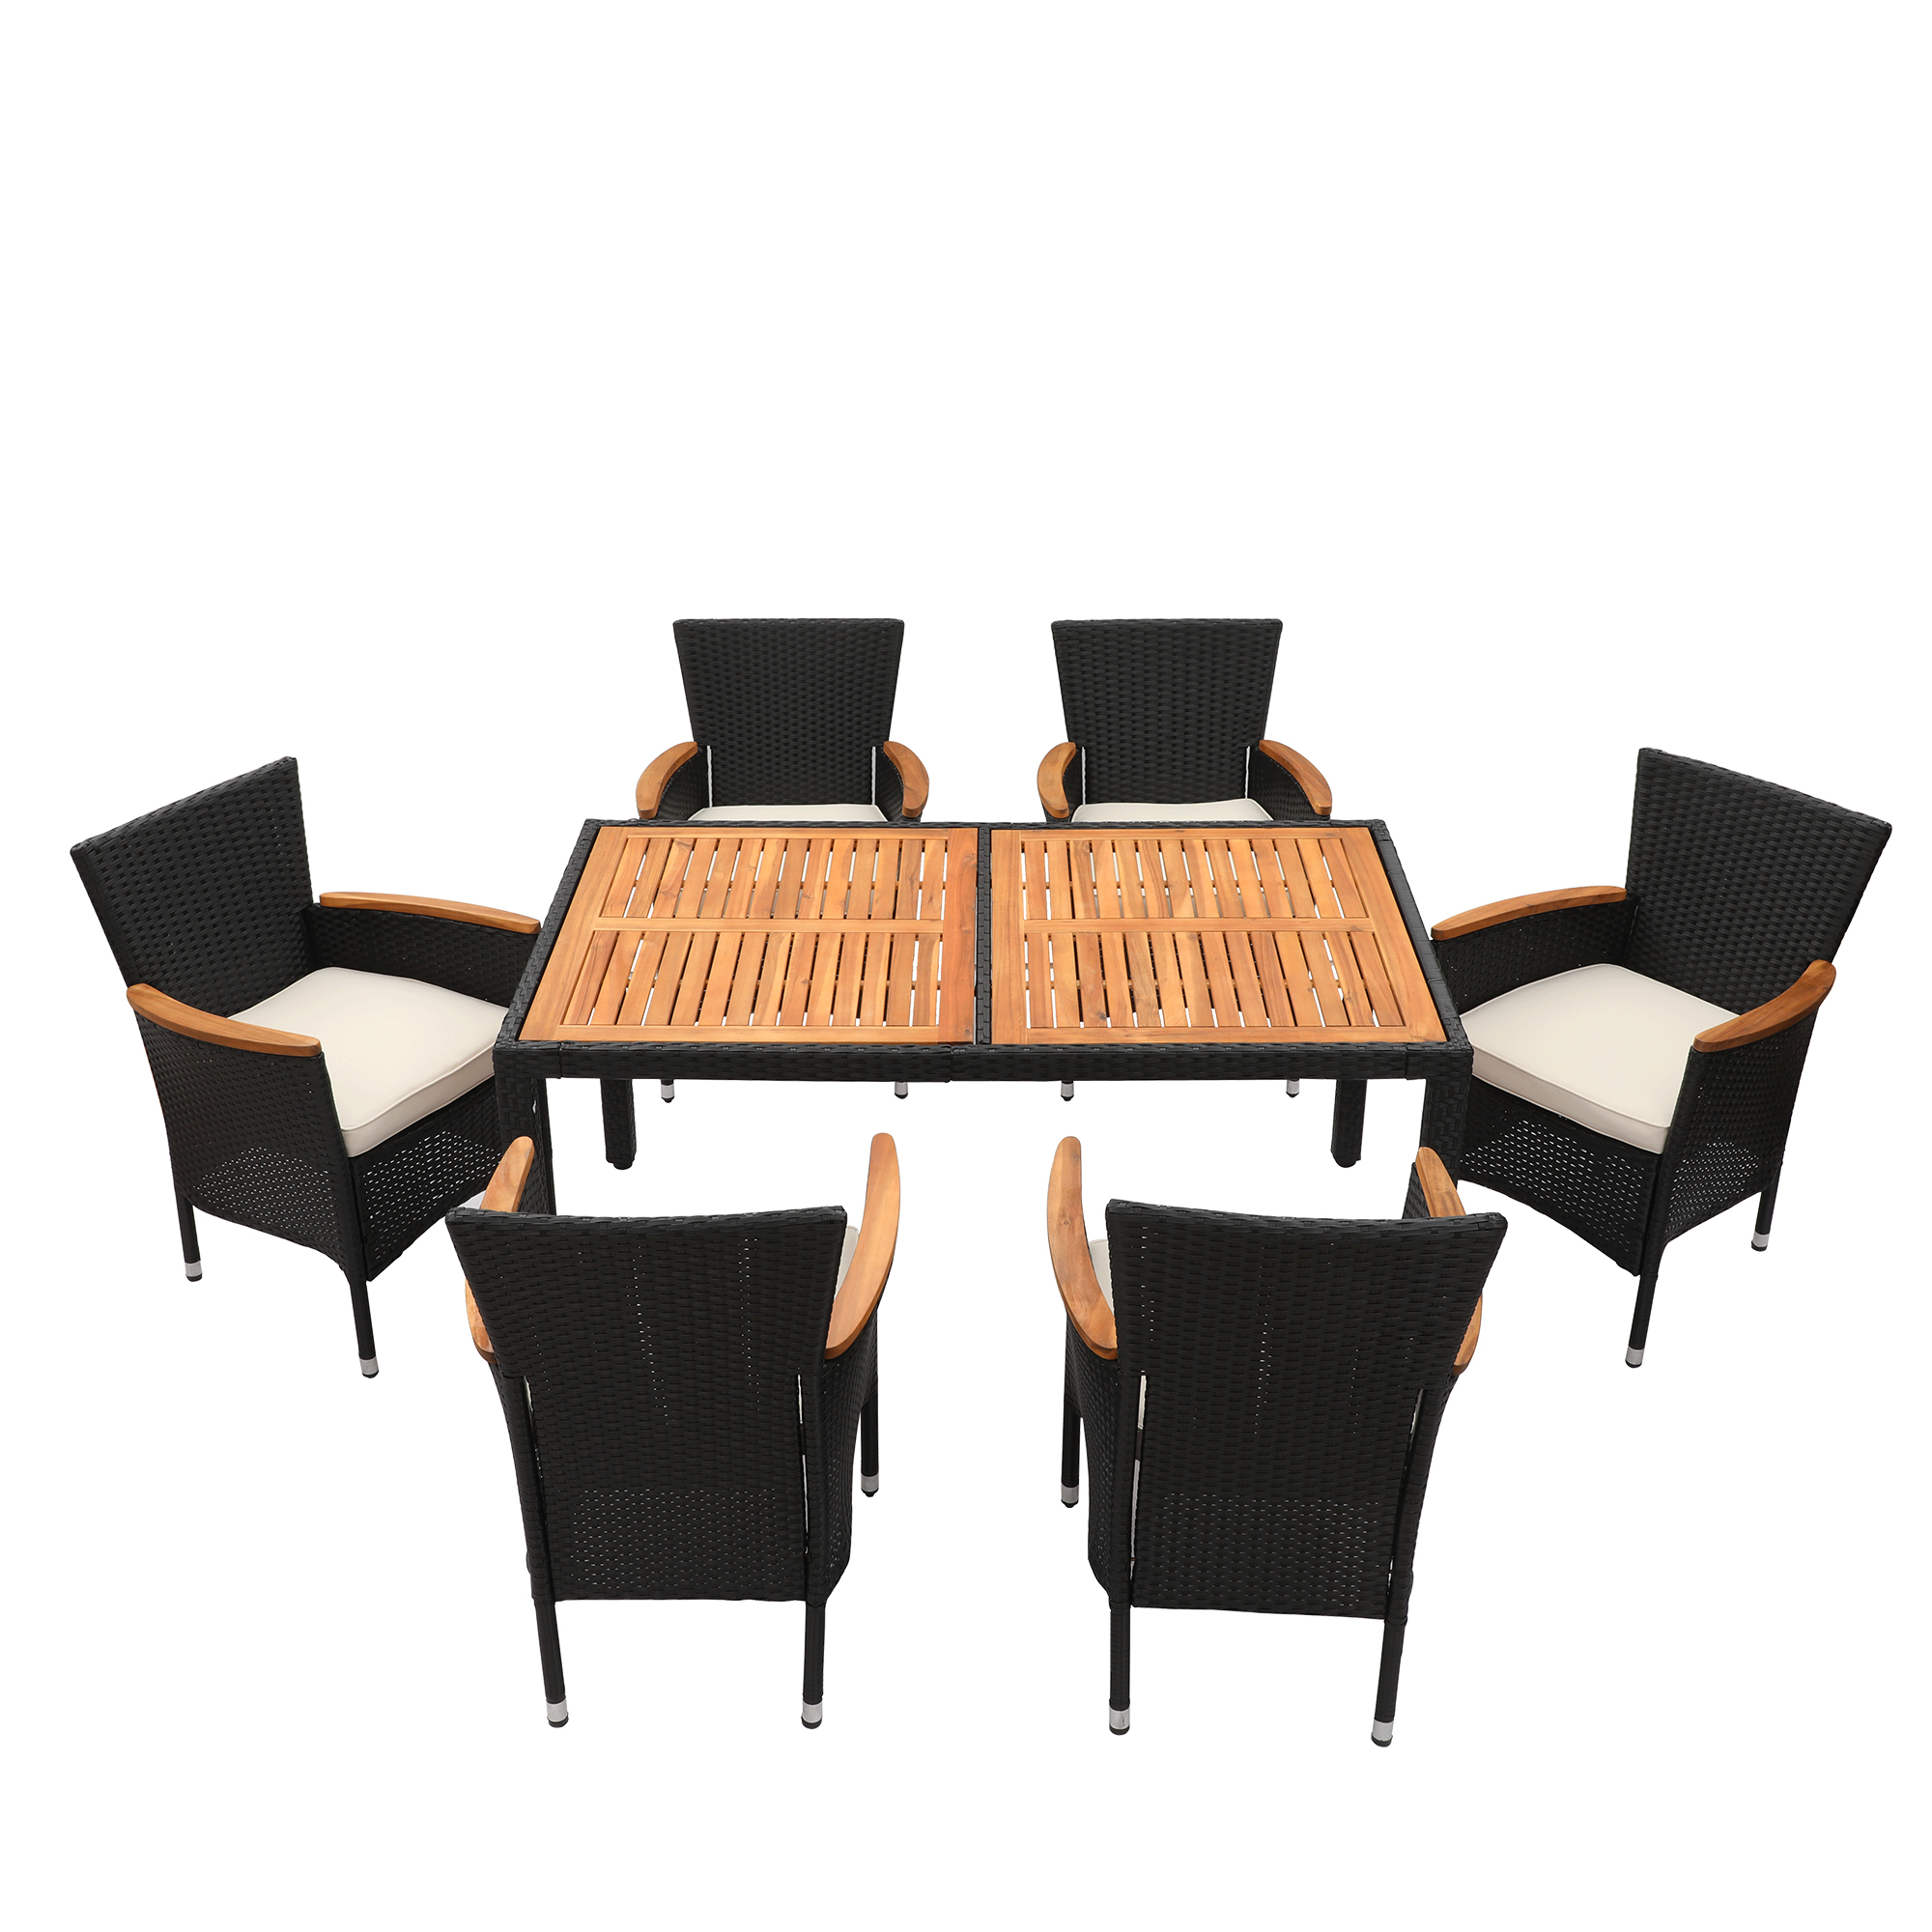 Outdoor Patio 7 Piece Dining Set for 6 Person Garden PE Wicker Rattan Dining Table and Chairs Set (Brown)